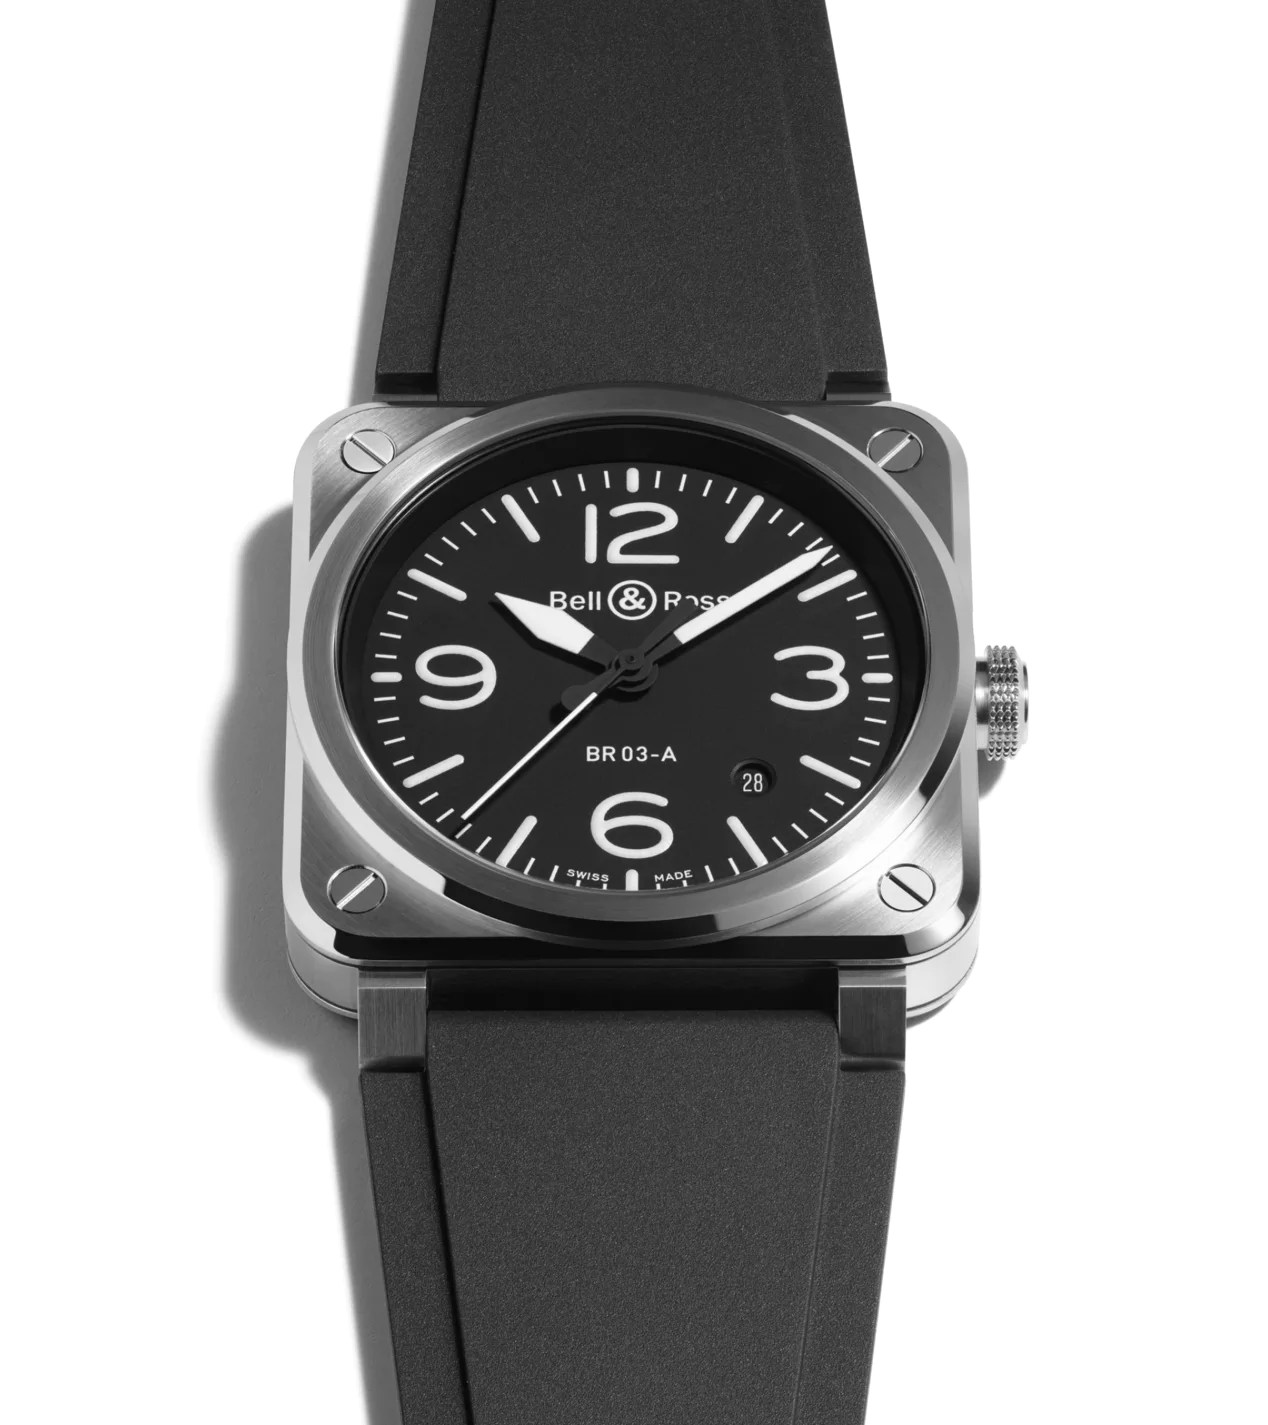 Bell & Ross Updates BR-03 Watch With 'Black Steel' Edition